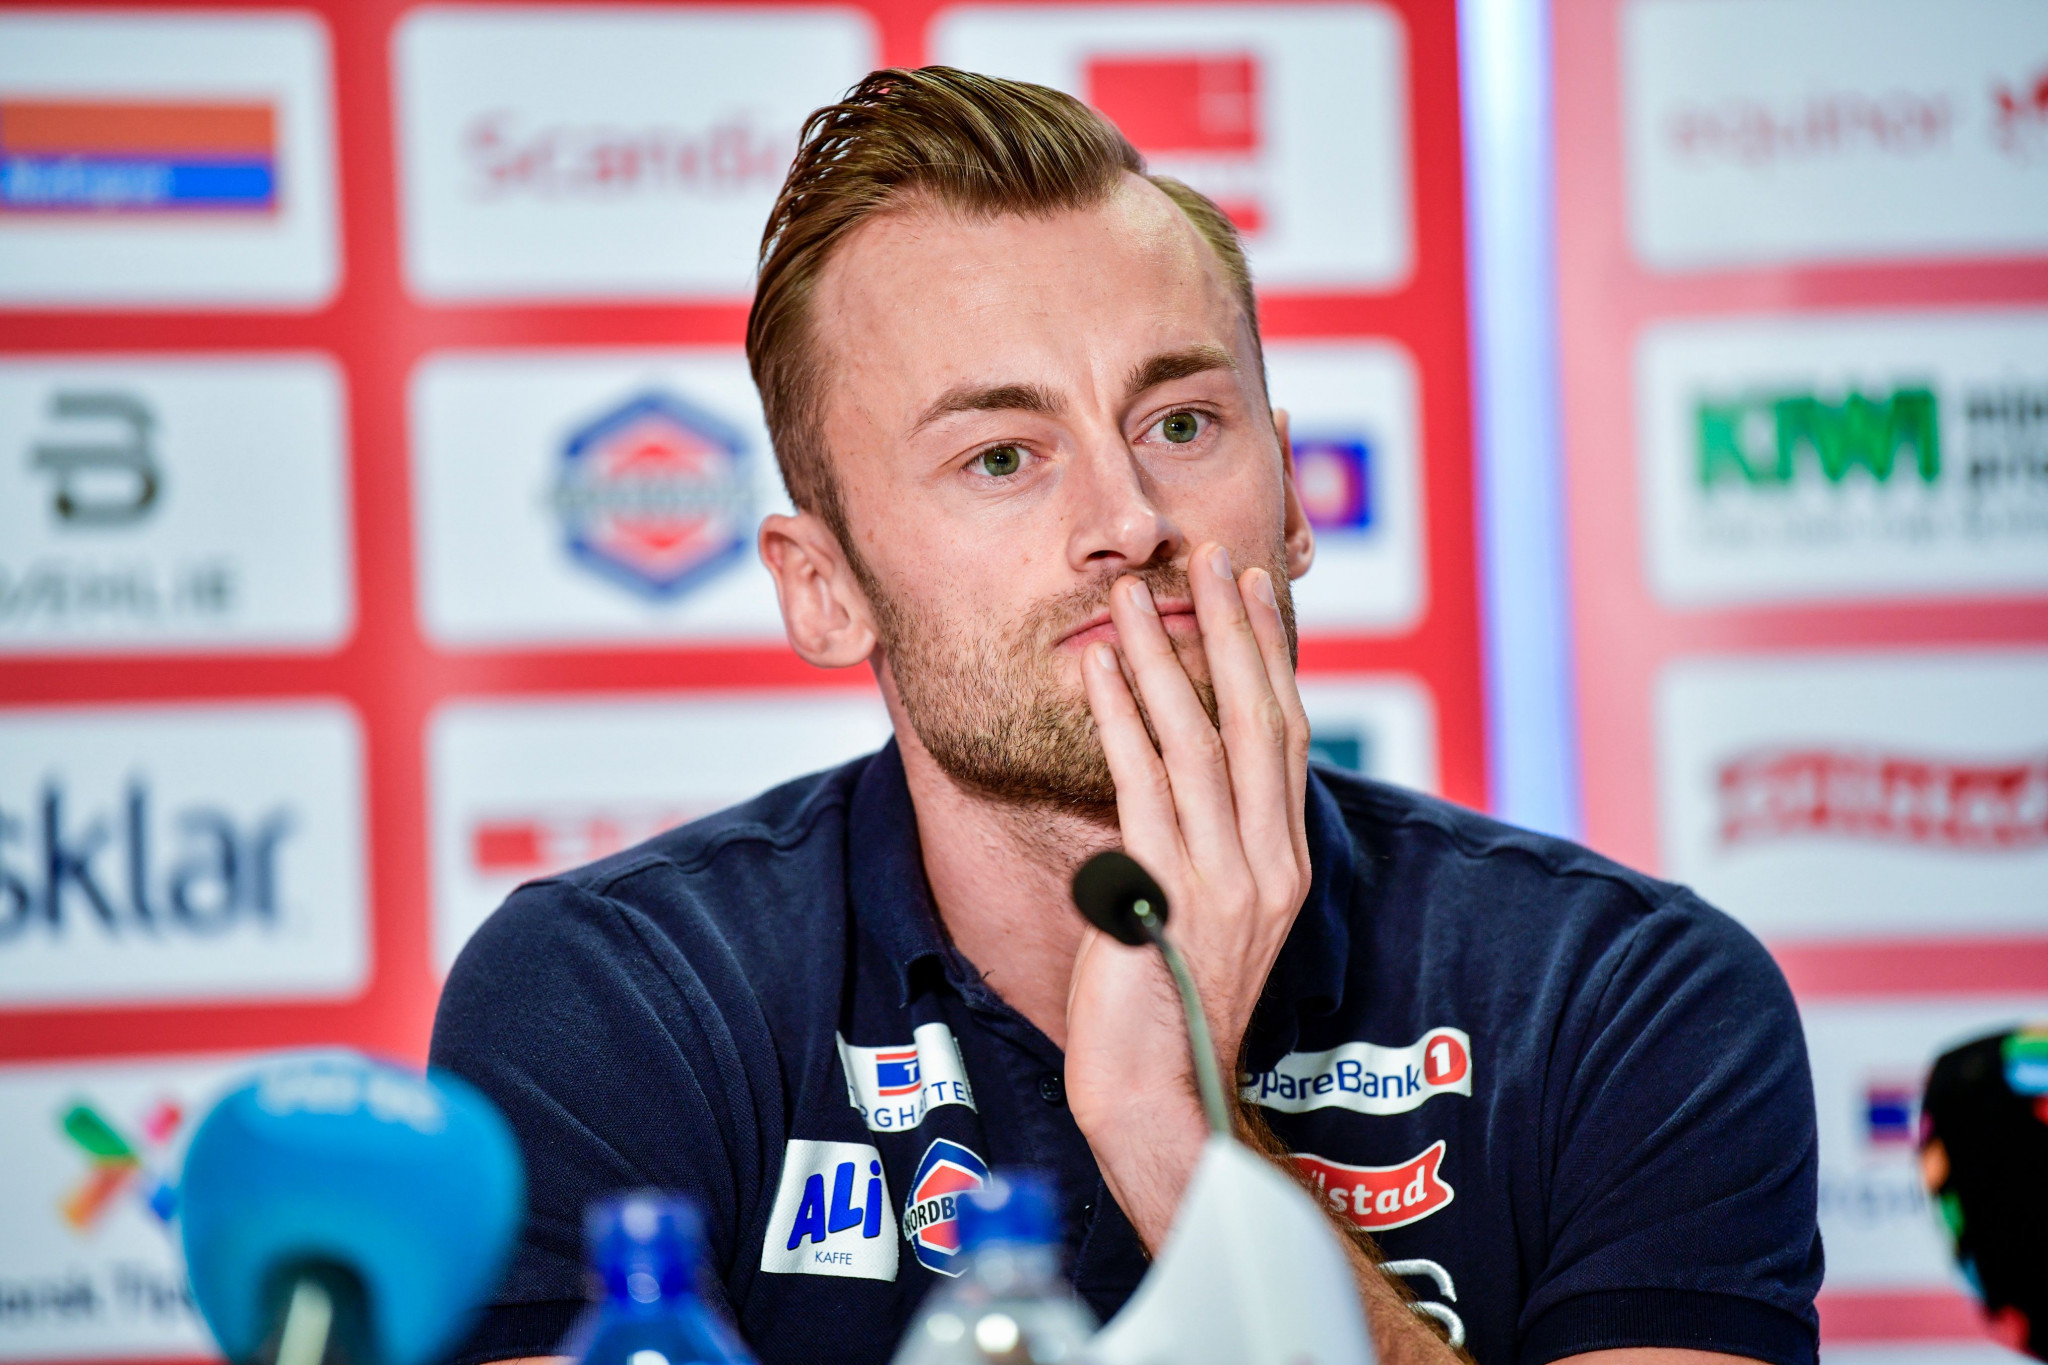 Norway's two-time Olympic gold medallist Petter Northug has admitted that police found cocaine in his house following a traffic incident ©Getty Images